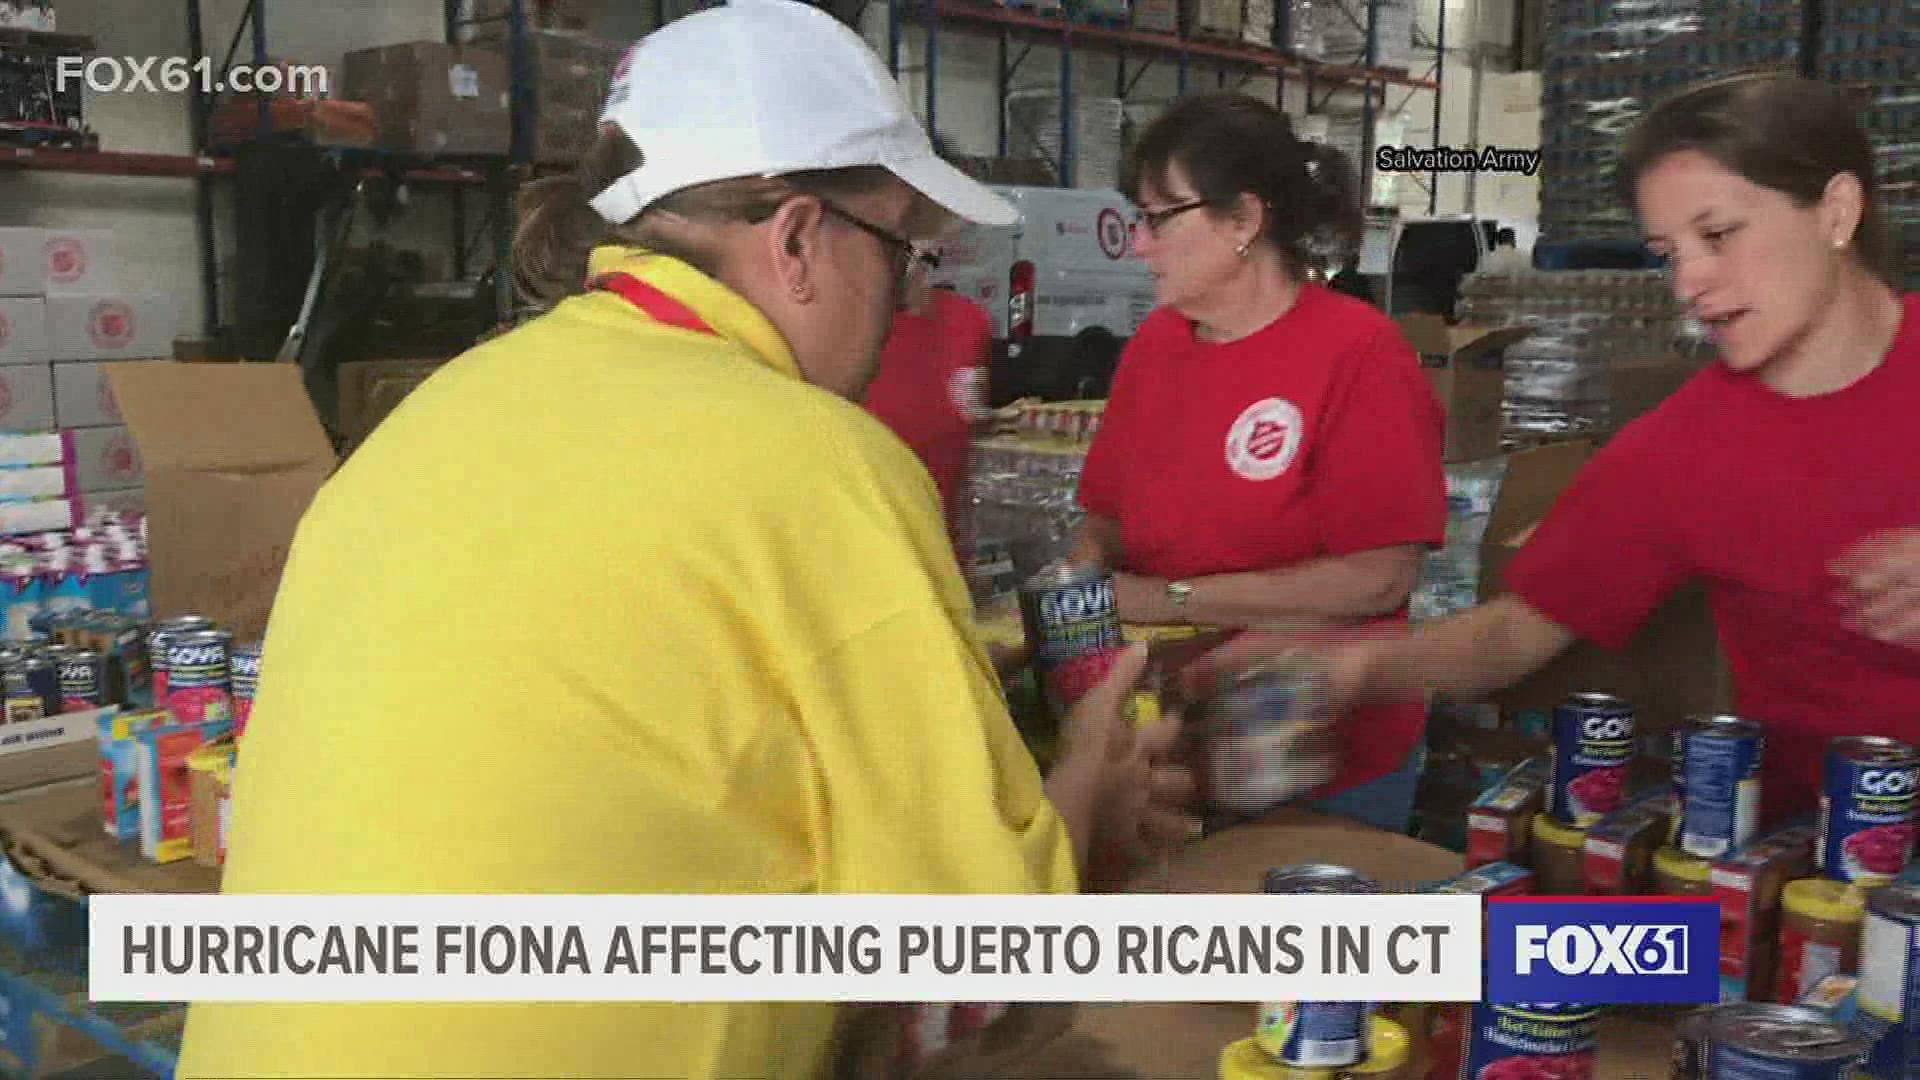 Local leaders react to the aftermath of Hurricane Fiona, just years after Hurricane Maria devastation